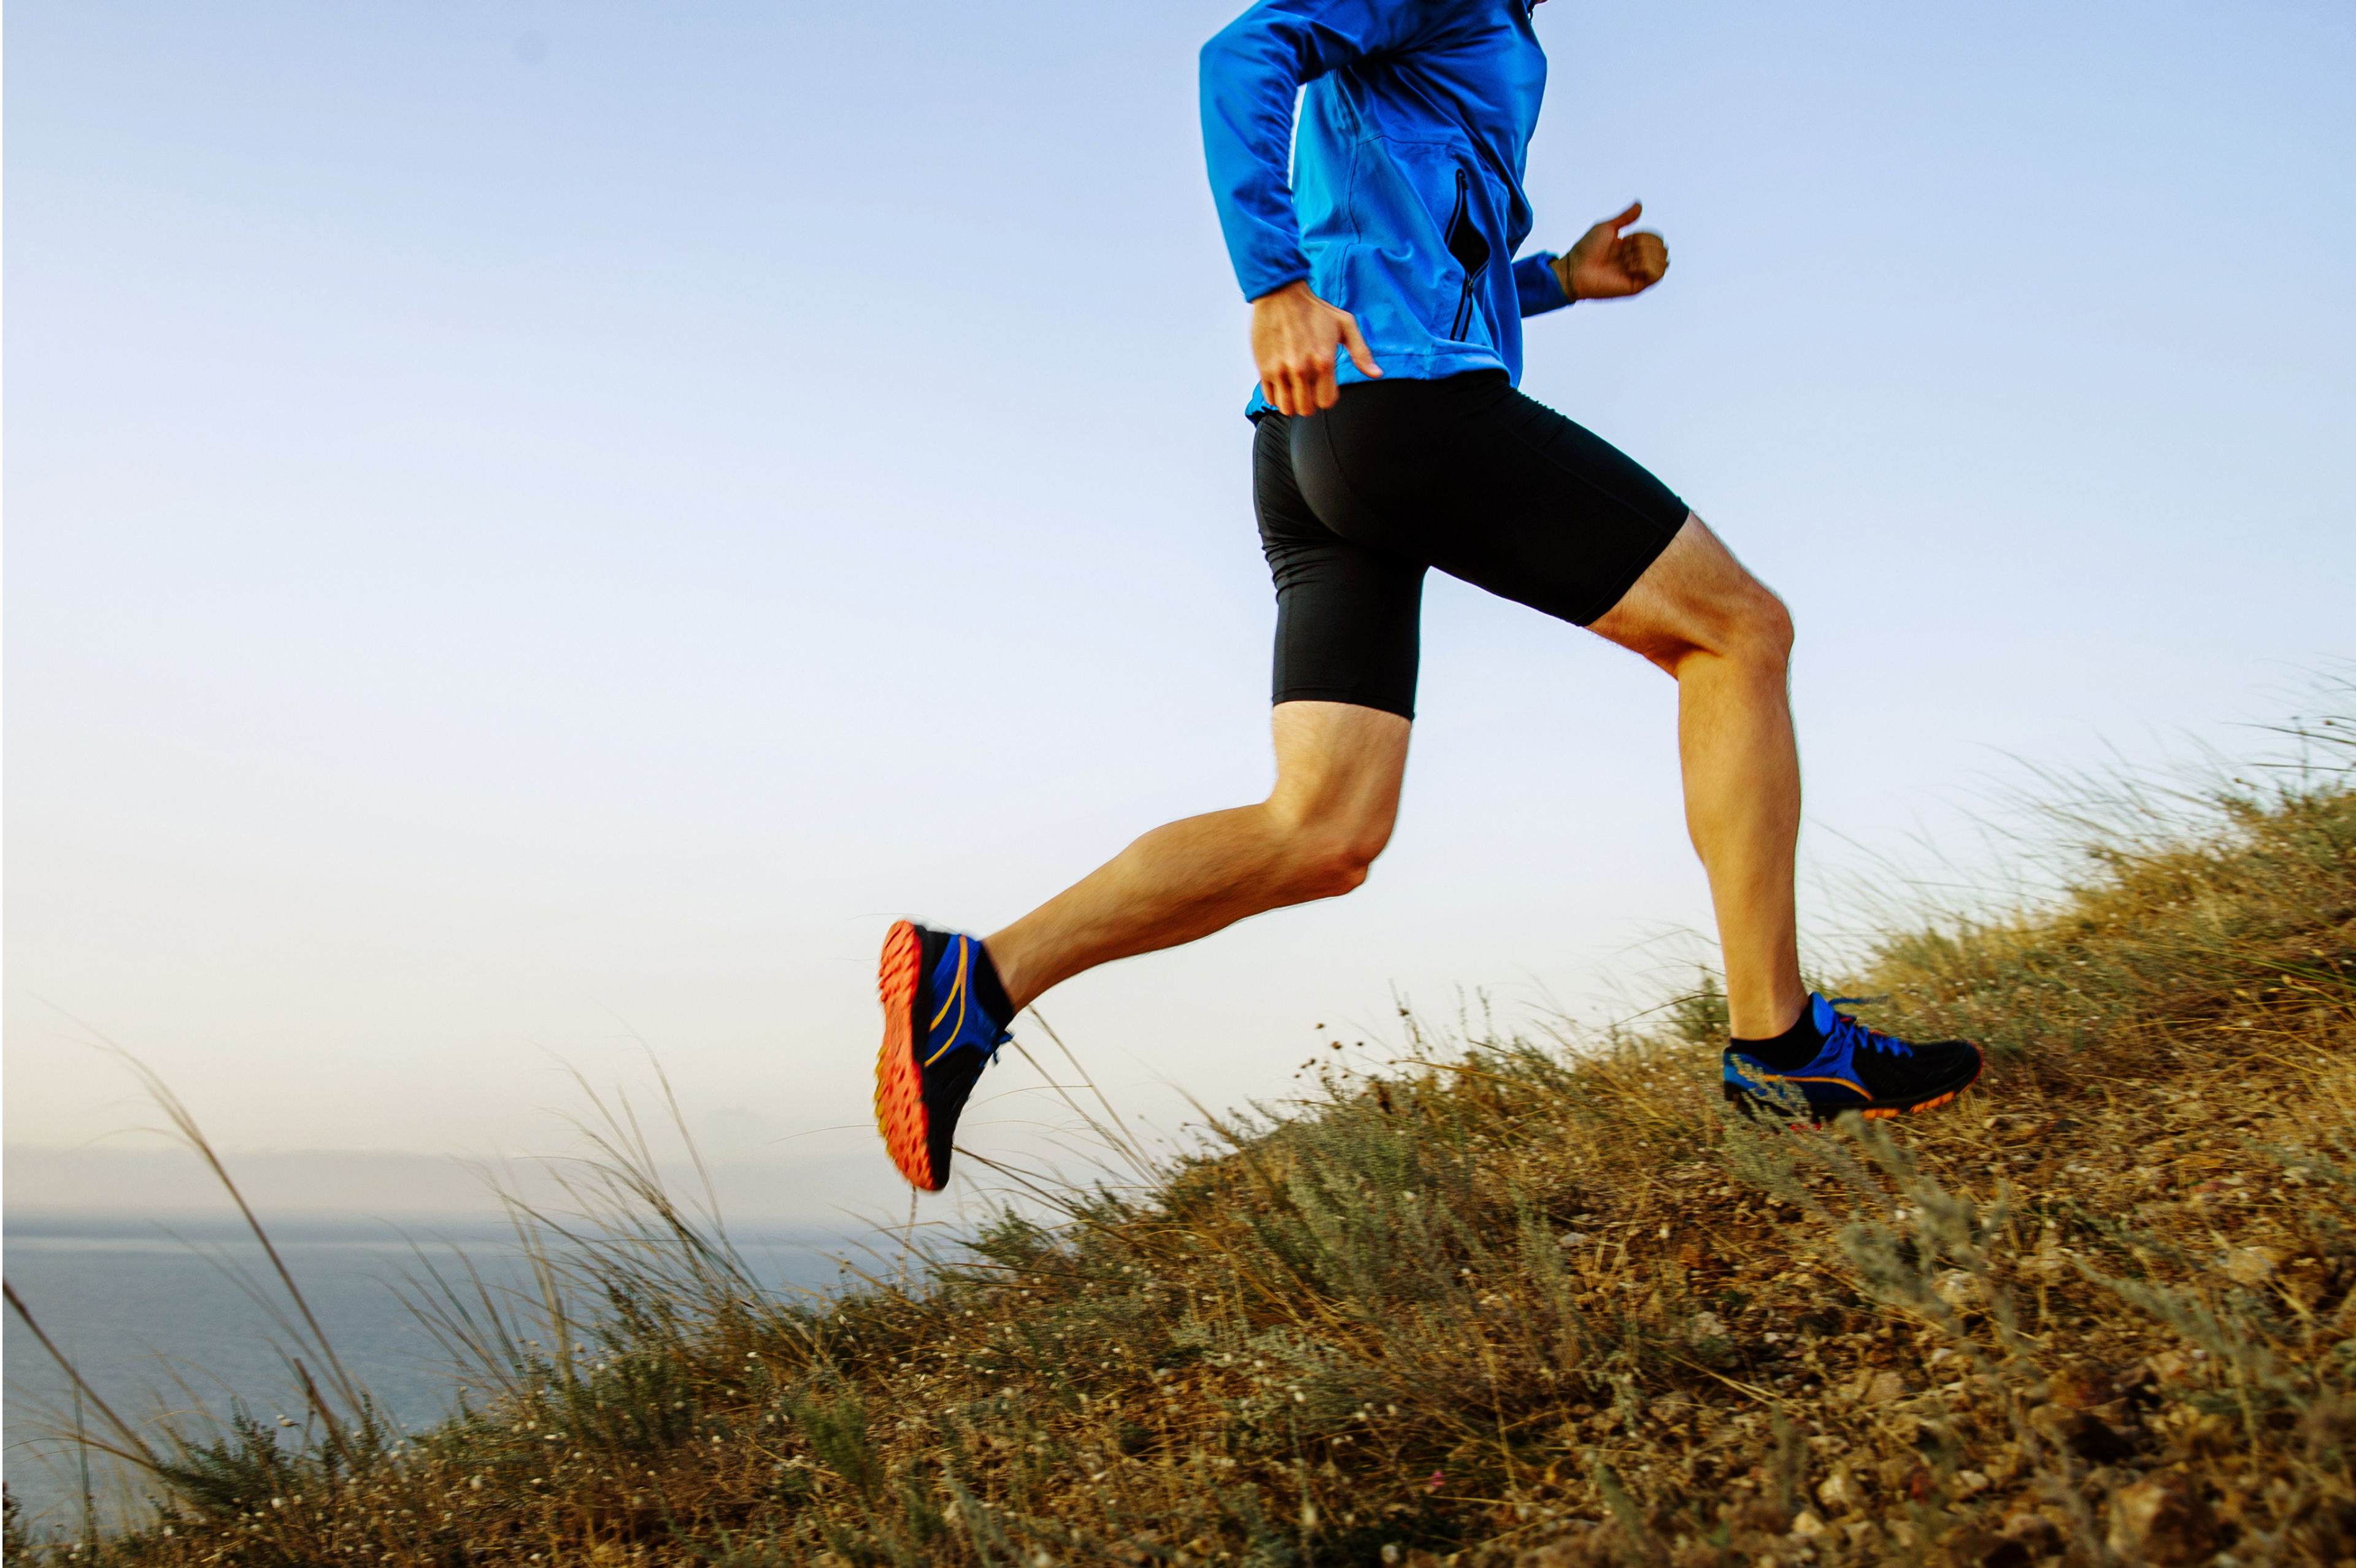 One way to reduce your training load is to run on flatter terrain - hilly terrain works your body harder.